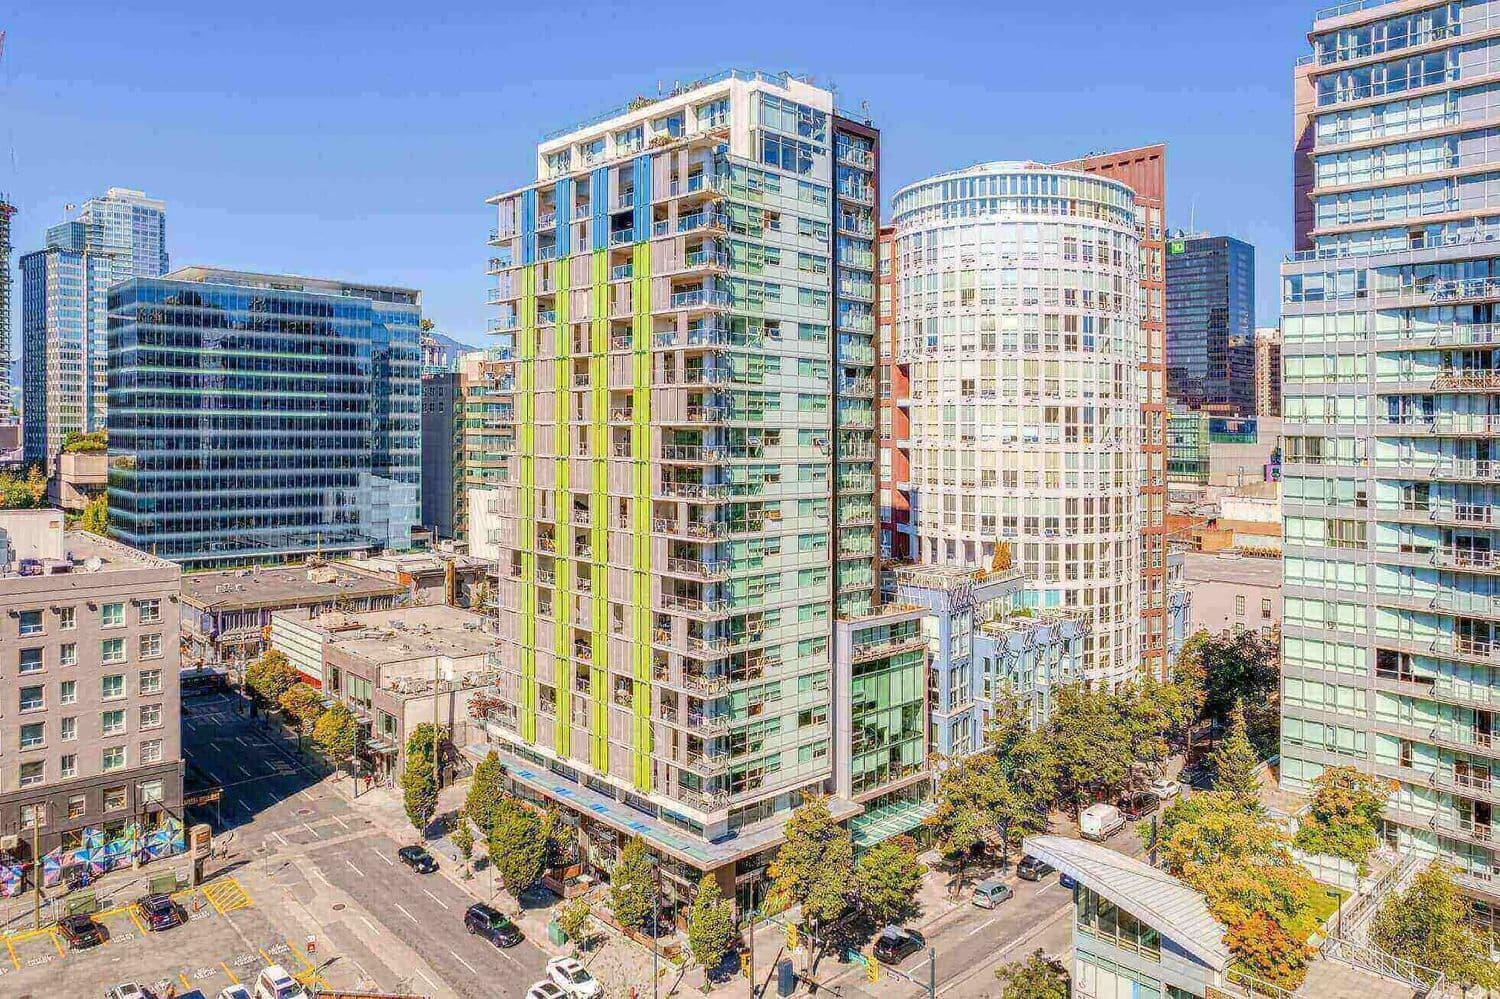 210-997 SEYMOUR STREET, Vancouver, British Columbia, ,Office,For Lease,C8058571